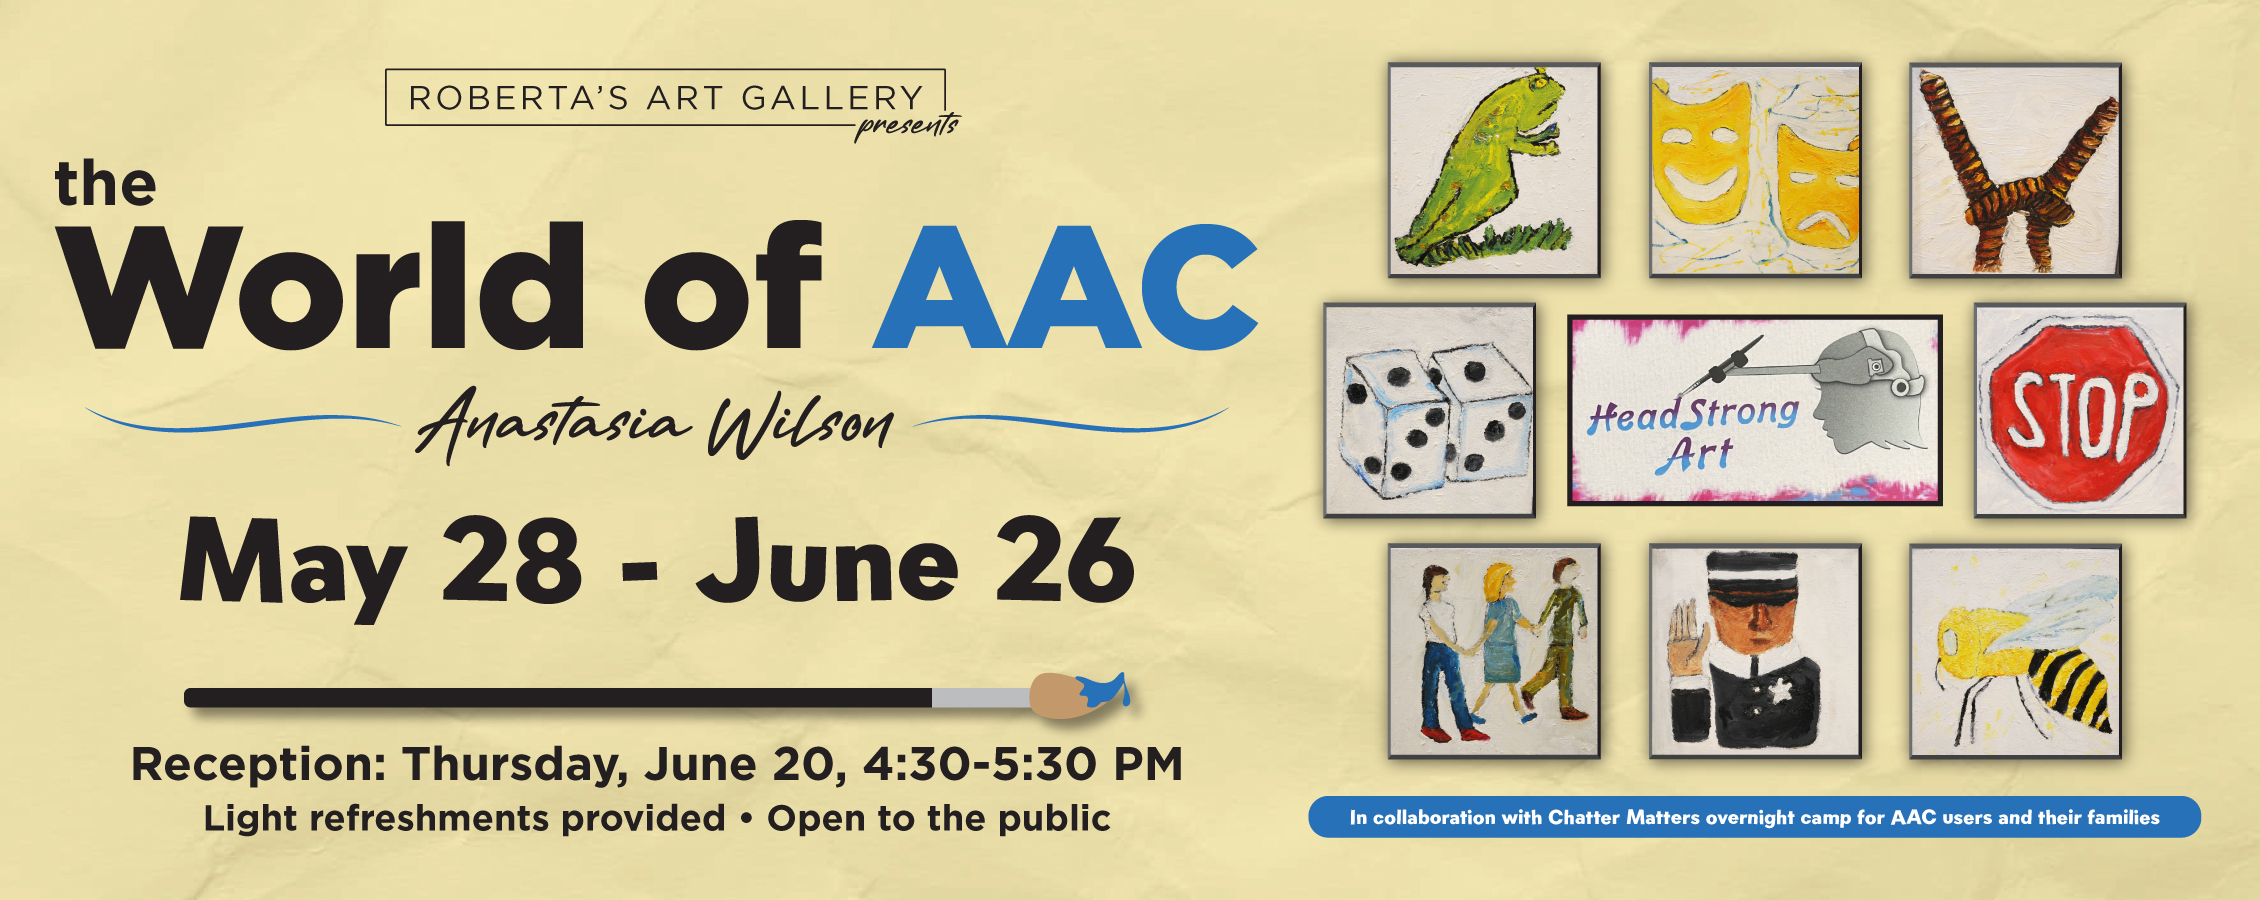 Header image with multiple images on a yellow background with the title "World of AAC" and exhibit dates from May 28-June 26